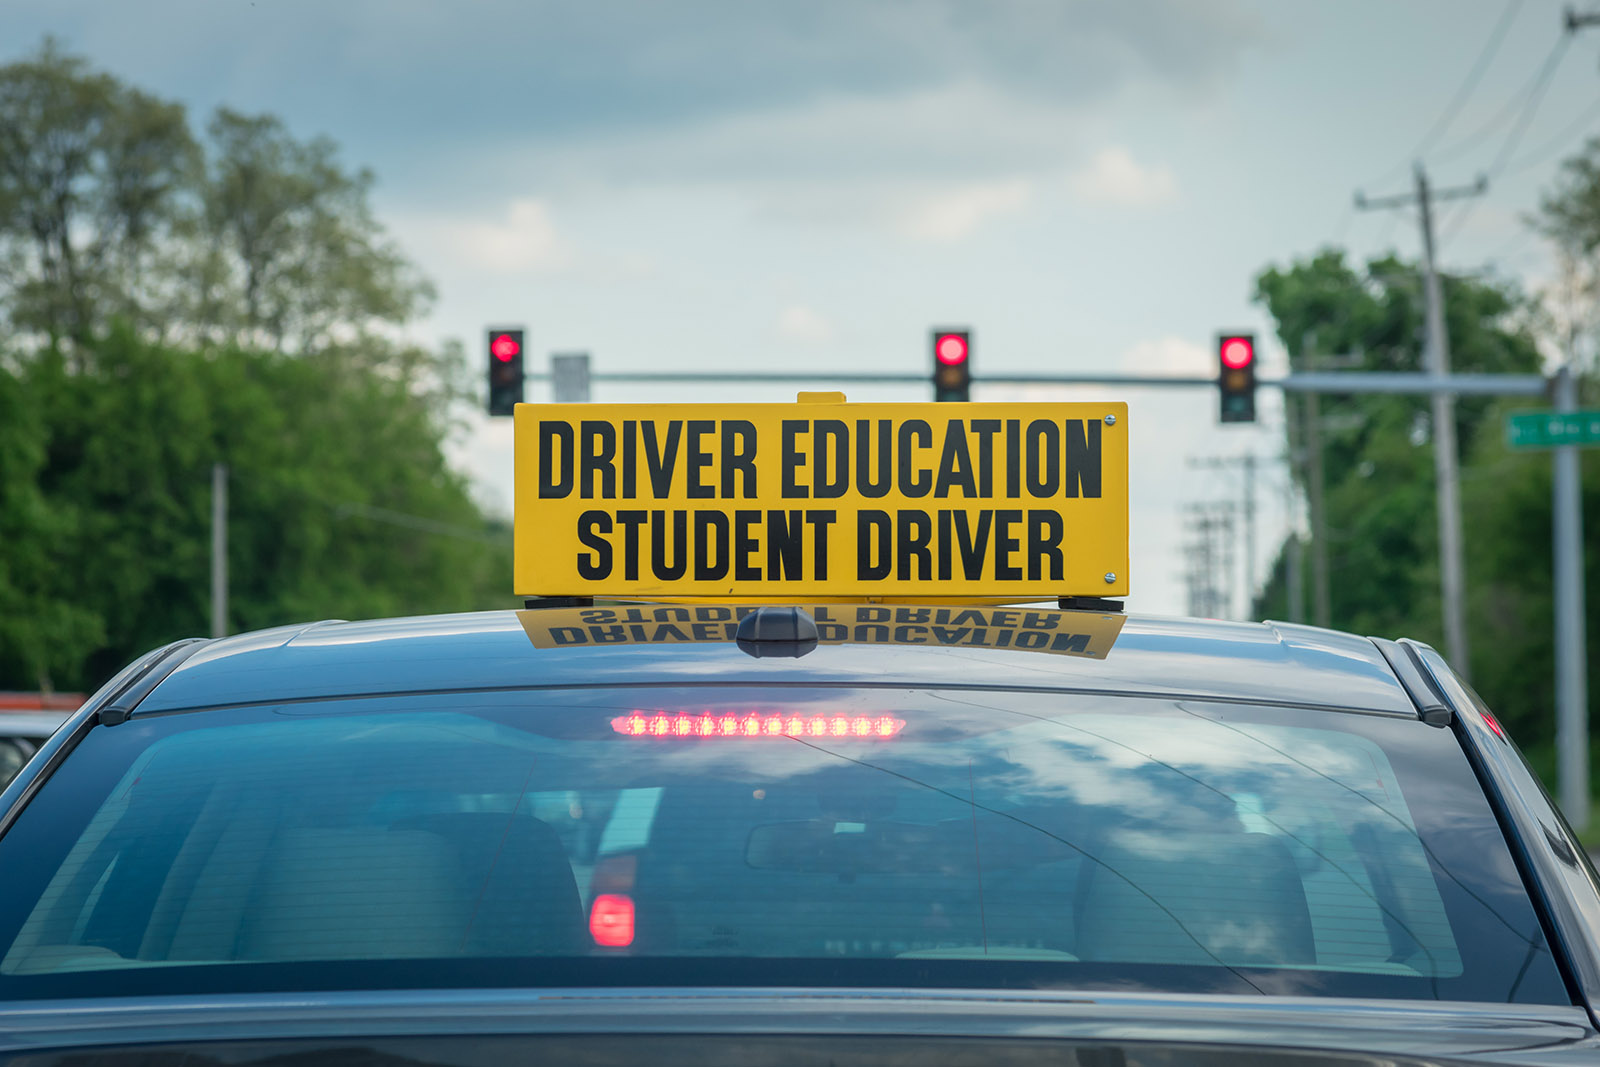 Driver education student driver car sign